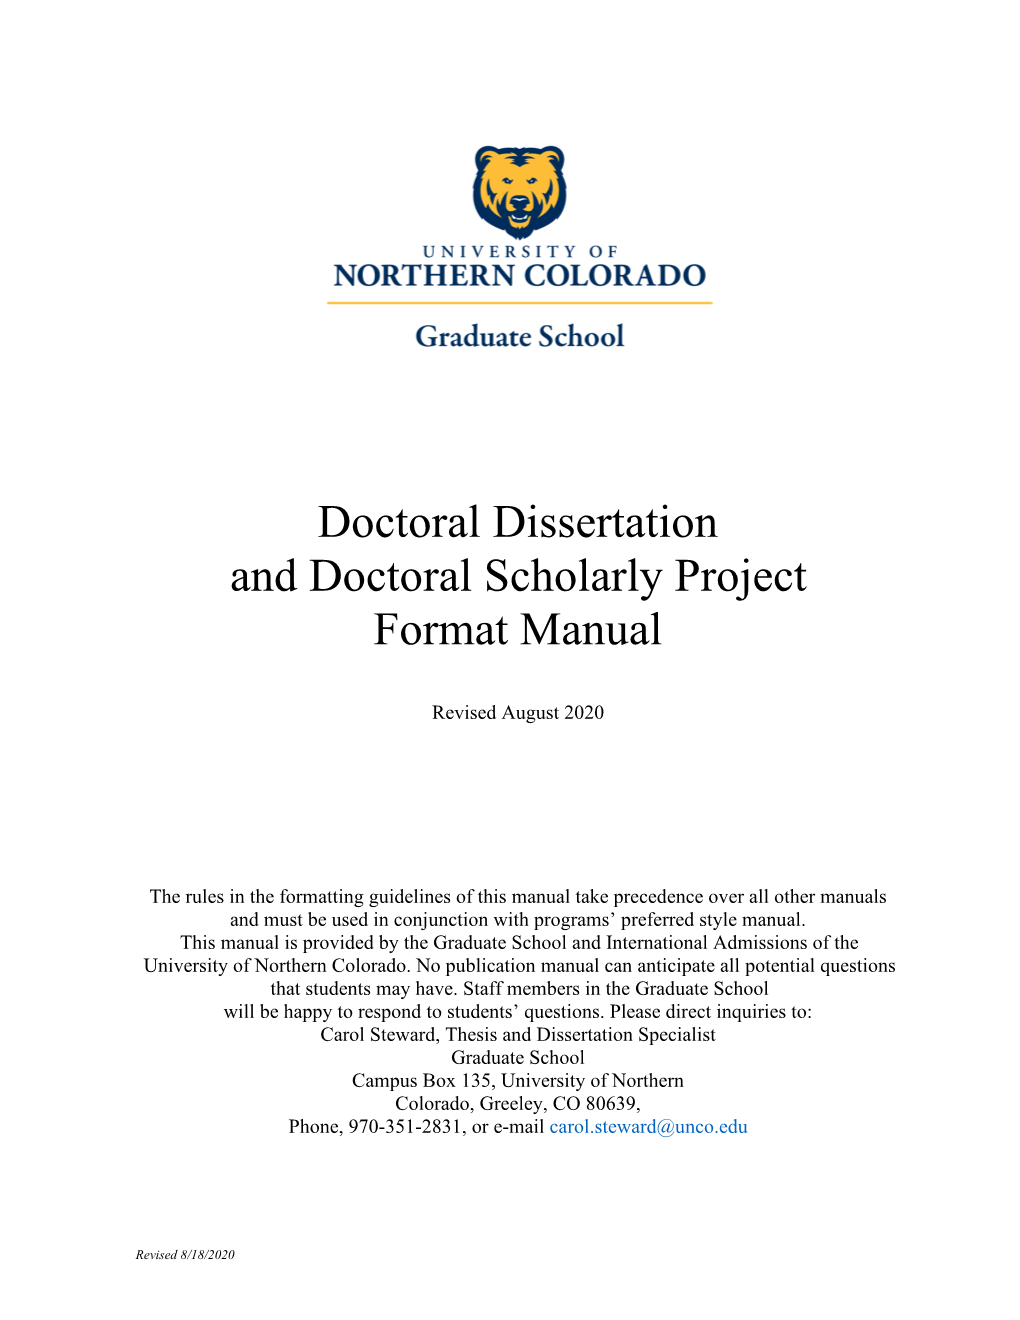 Doctoral Dissertation and Doctoral Scholarly Project Format Manual